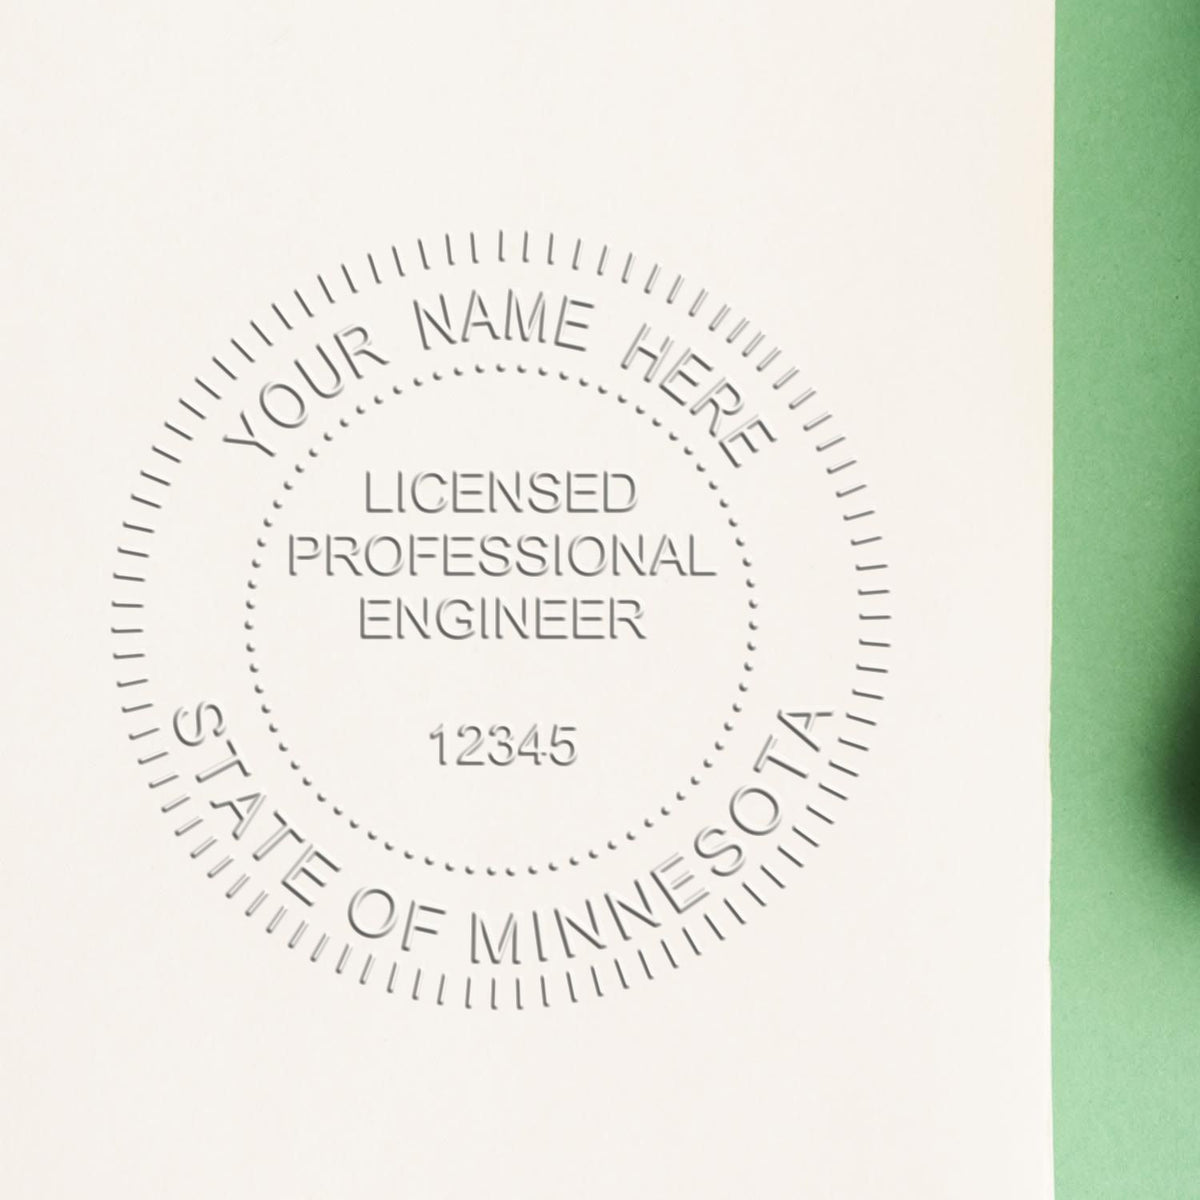 A stamped impression of the Soft Minnesota Professional Engineer Seal in this stylish lifestyle photo, setting the tone for a unique and personalized product.